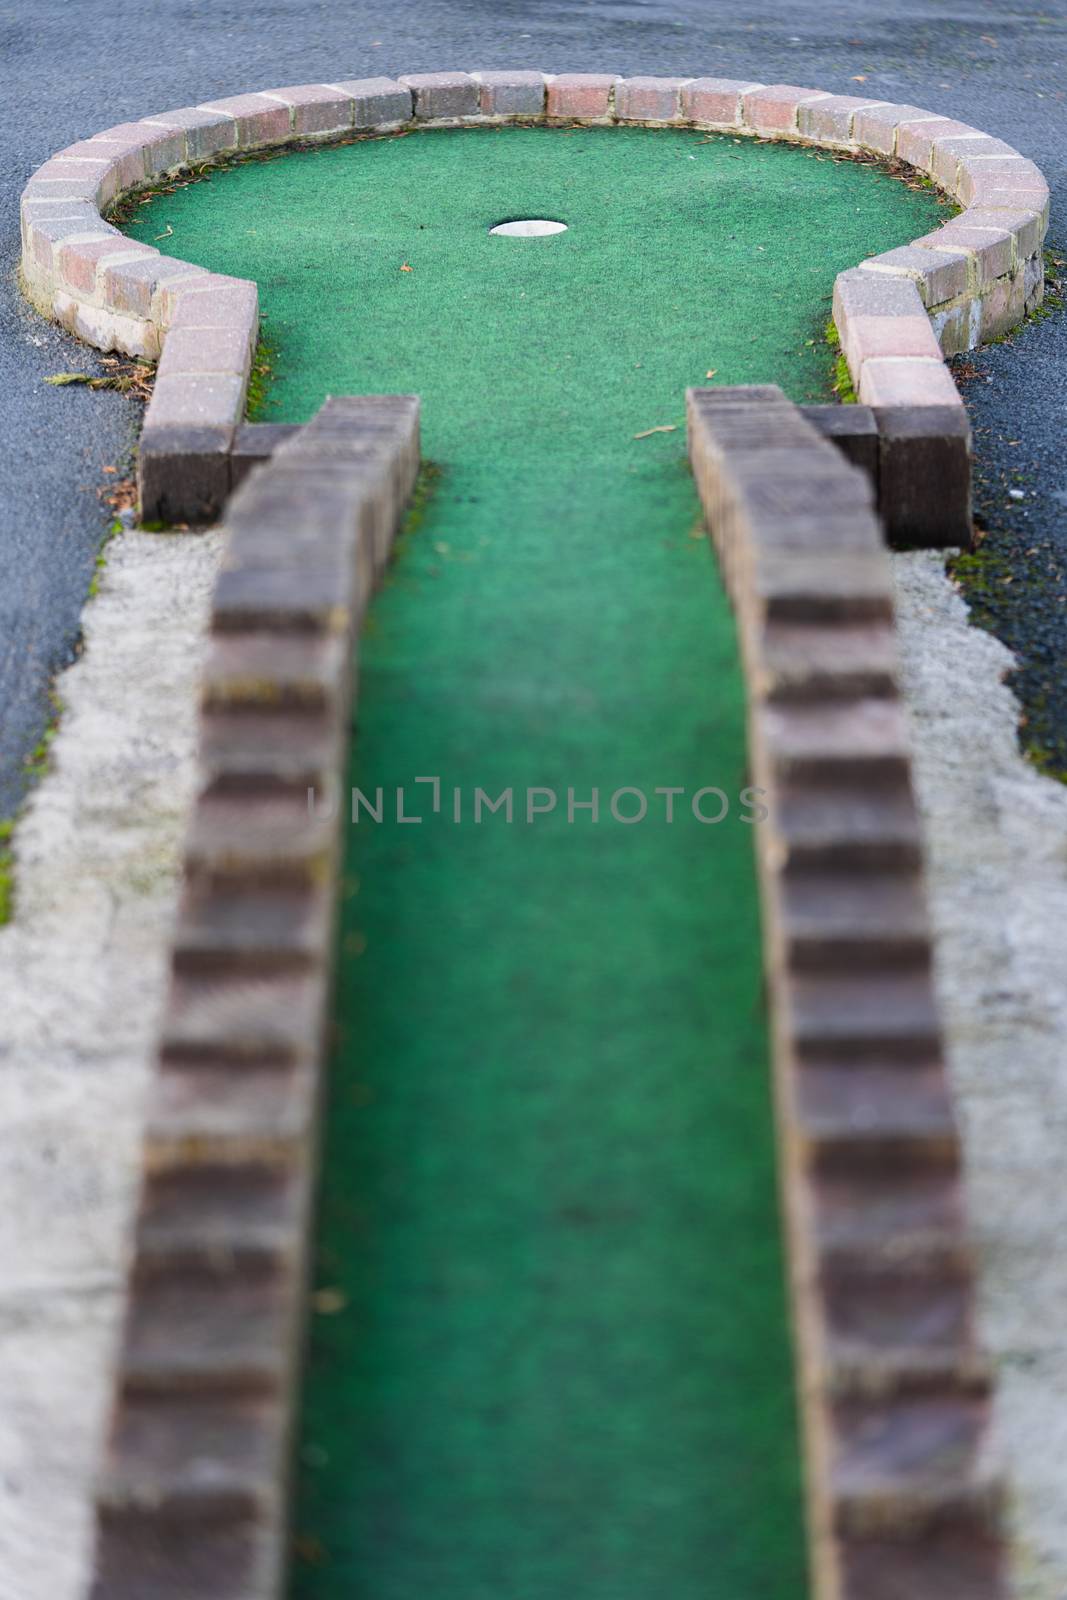 Crazy Golf Game by samULvisuals